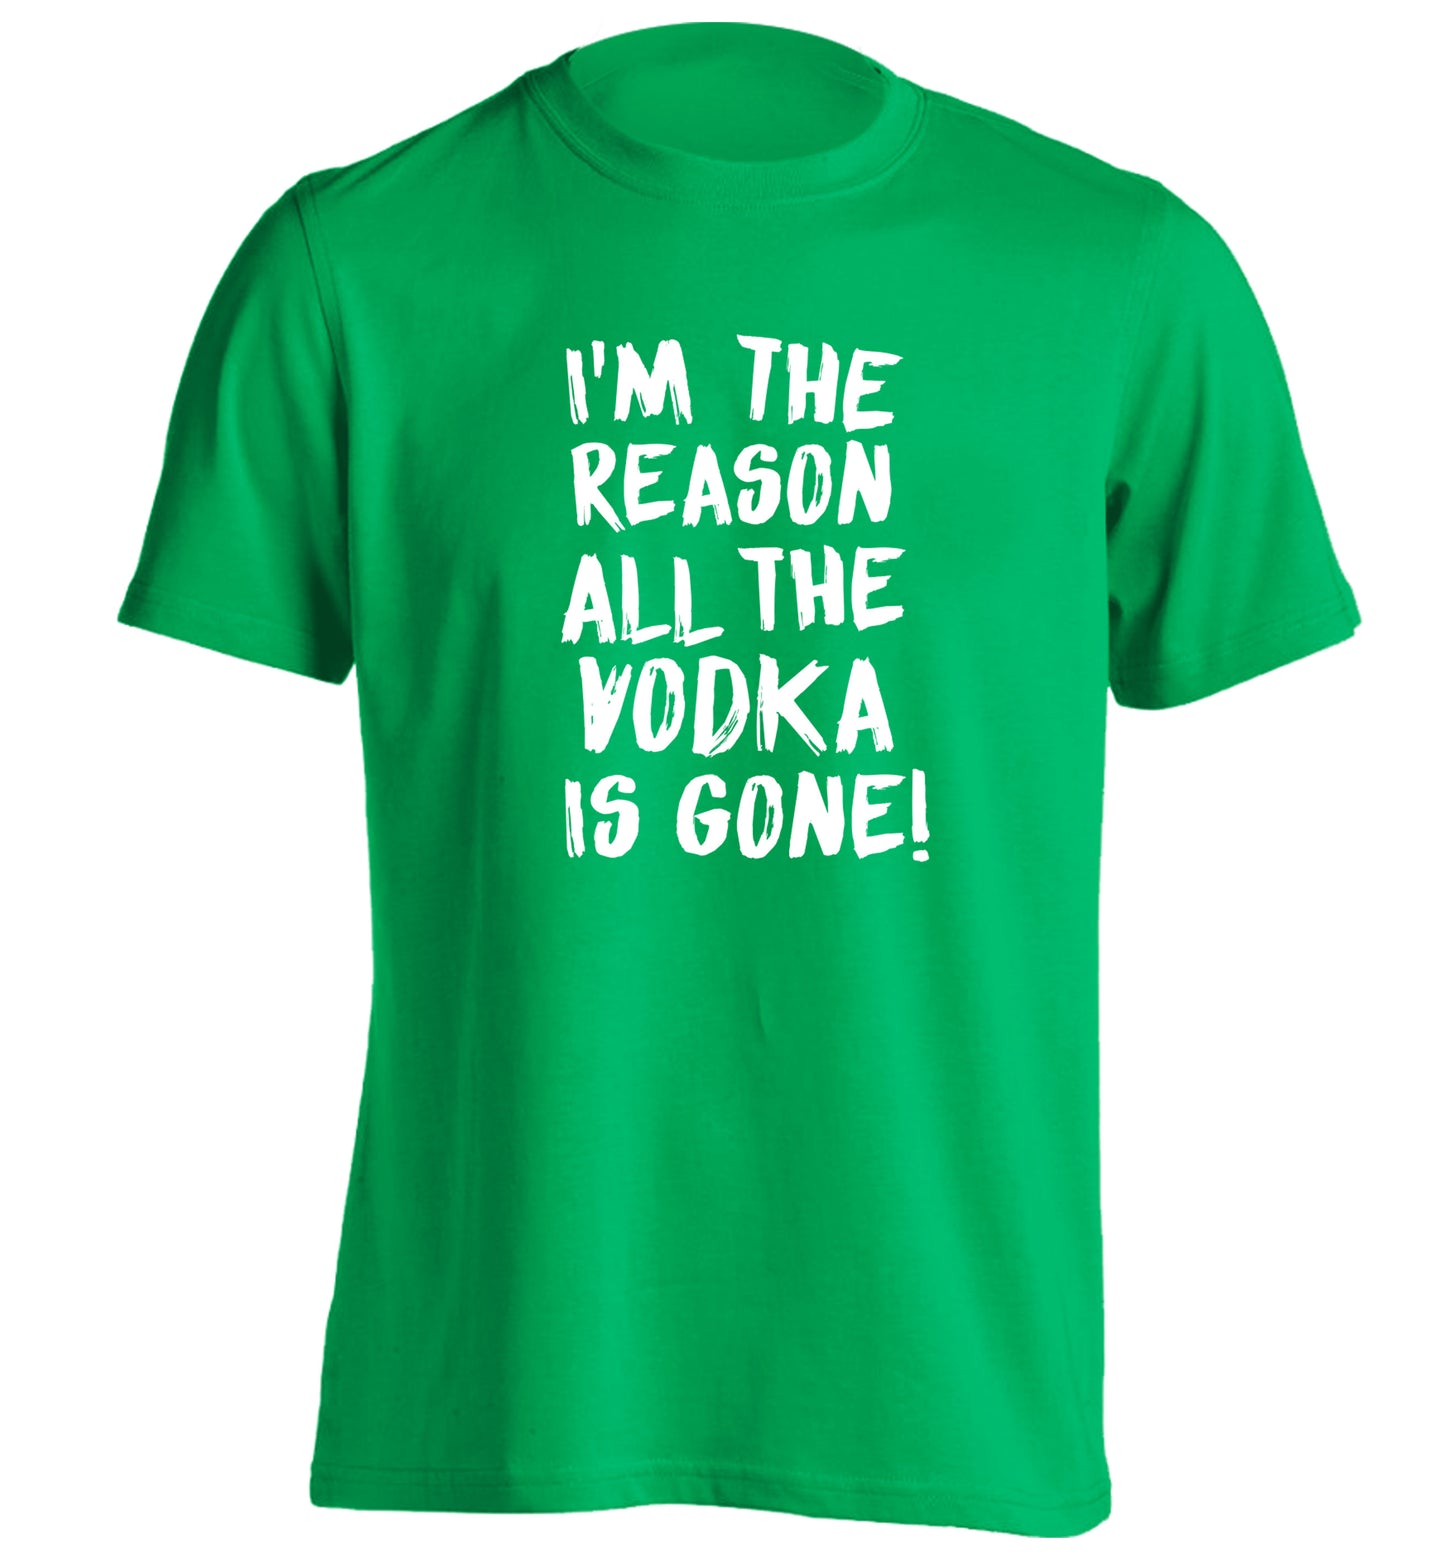 I'm the reason all the tequila is gone adults unisex green Tshirt 2XL